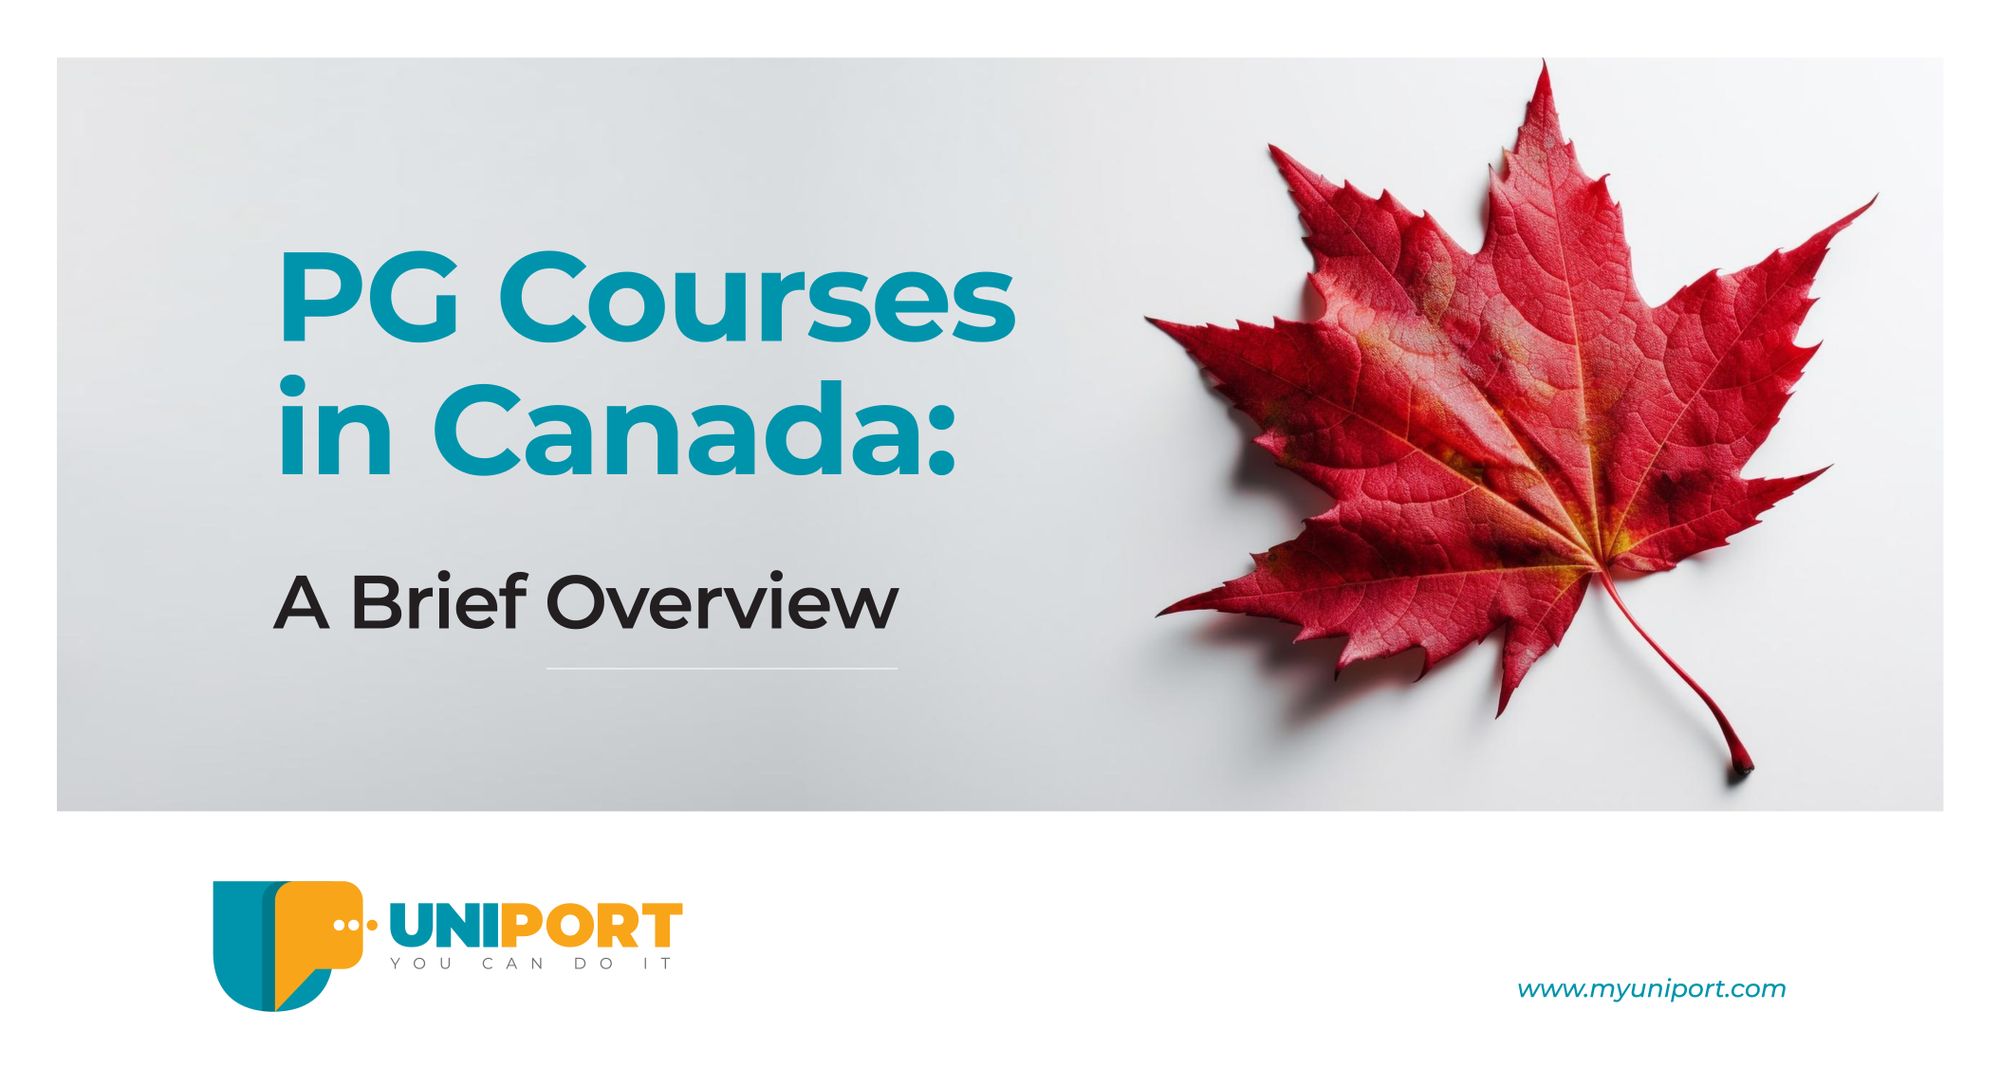 PG Courses in Canada: A Brief Overview